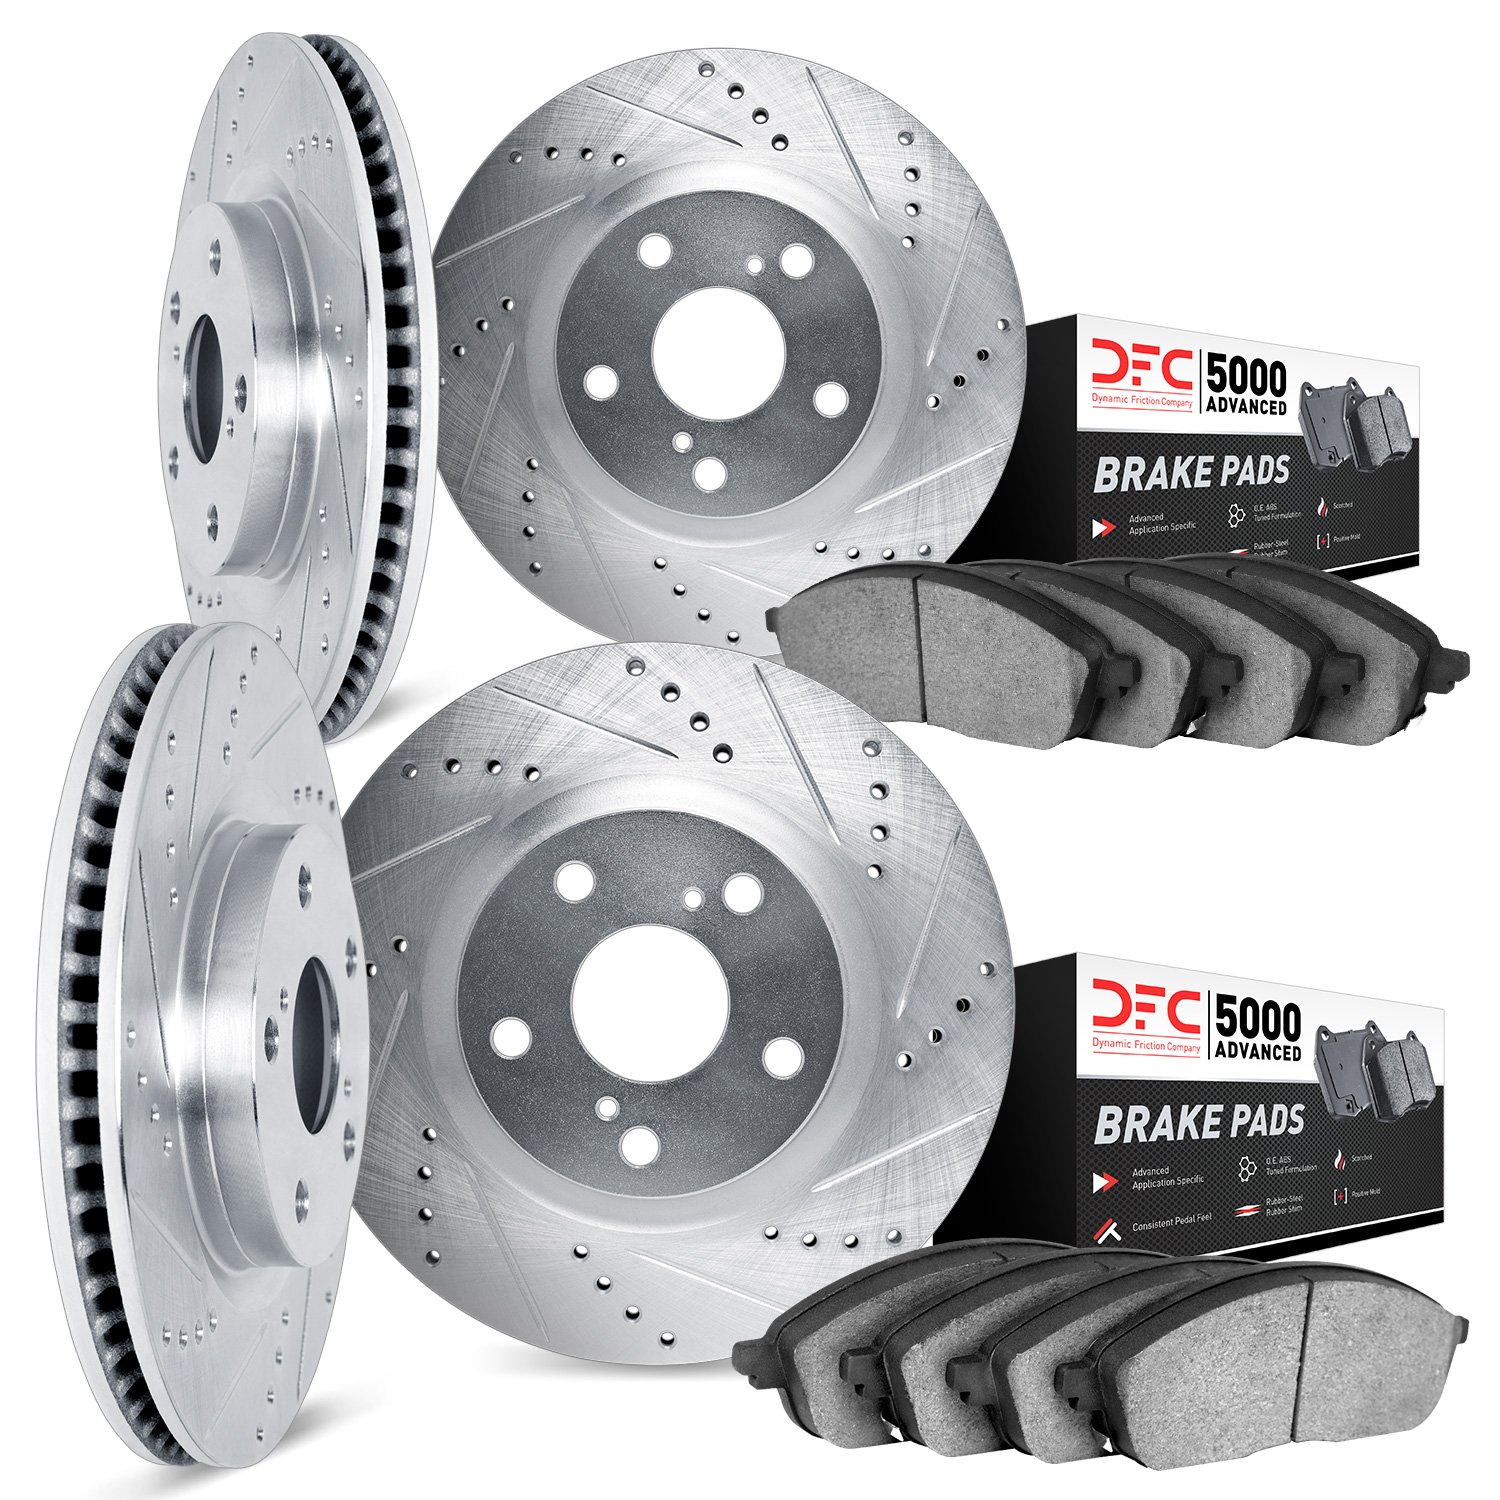 7504-54295 Drilled/Slotted Brake Rotors w/5000 Advanced Brake Pads Kit [Silver], 2013-2014 Ford/Lincoln/Mercury/Mazda, Position: